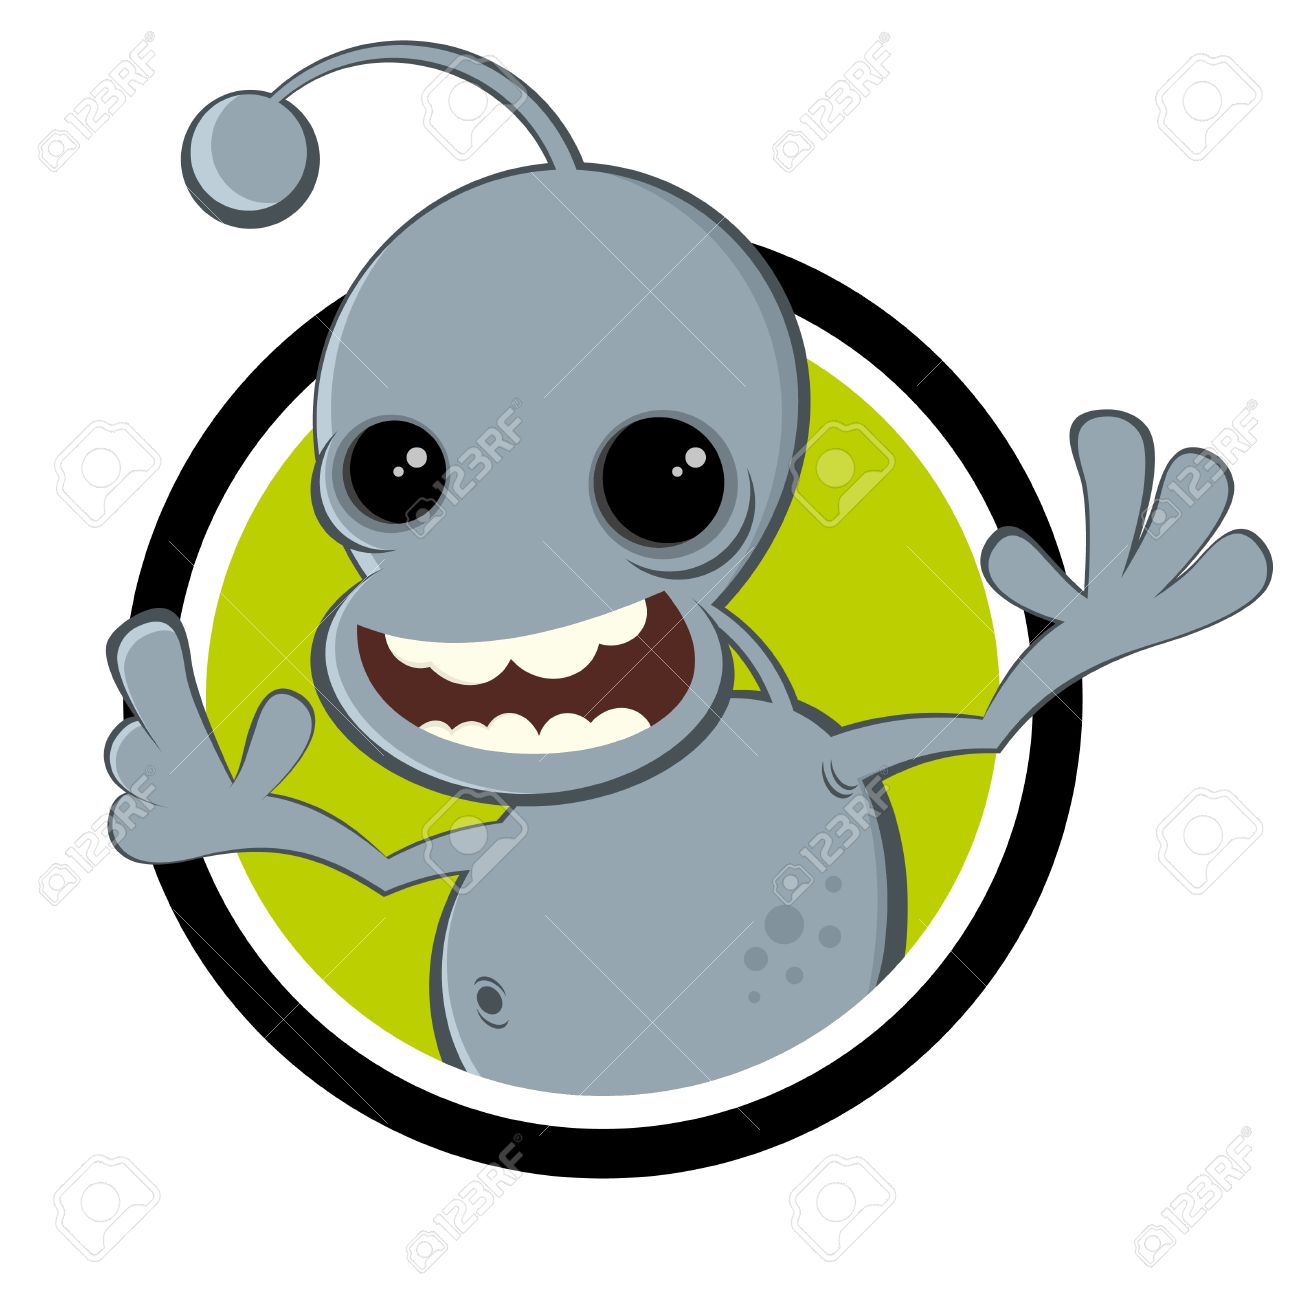 Angry Alien Funny Cartoon Image